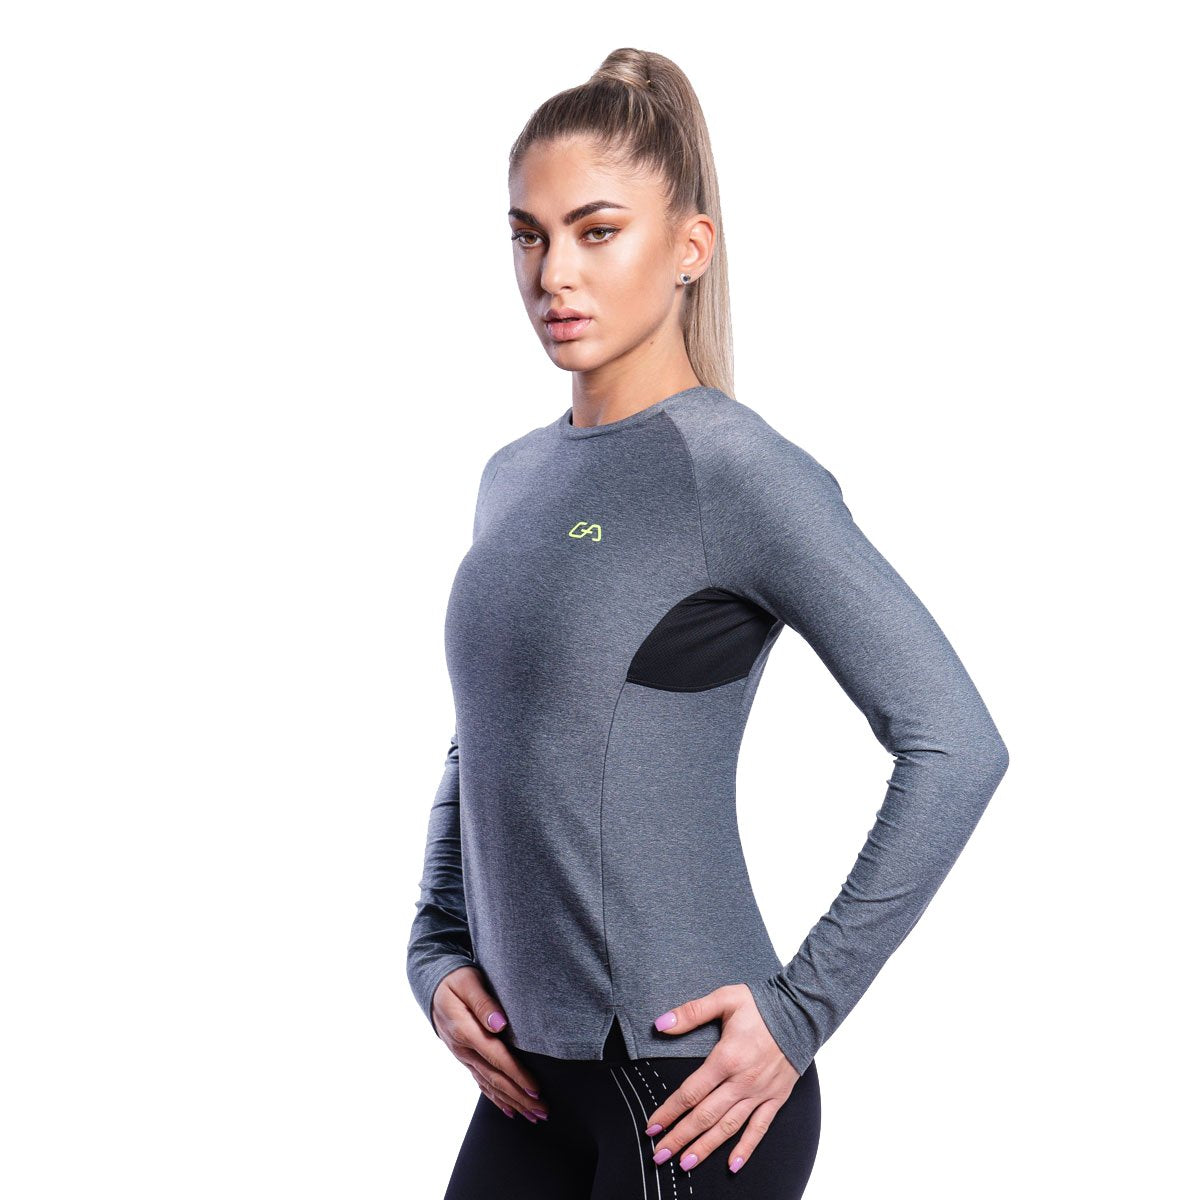 Performance Tight-Fit T-Shirt for Women